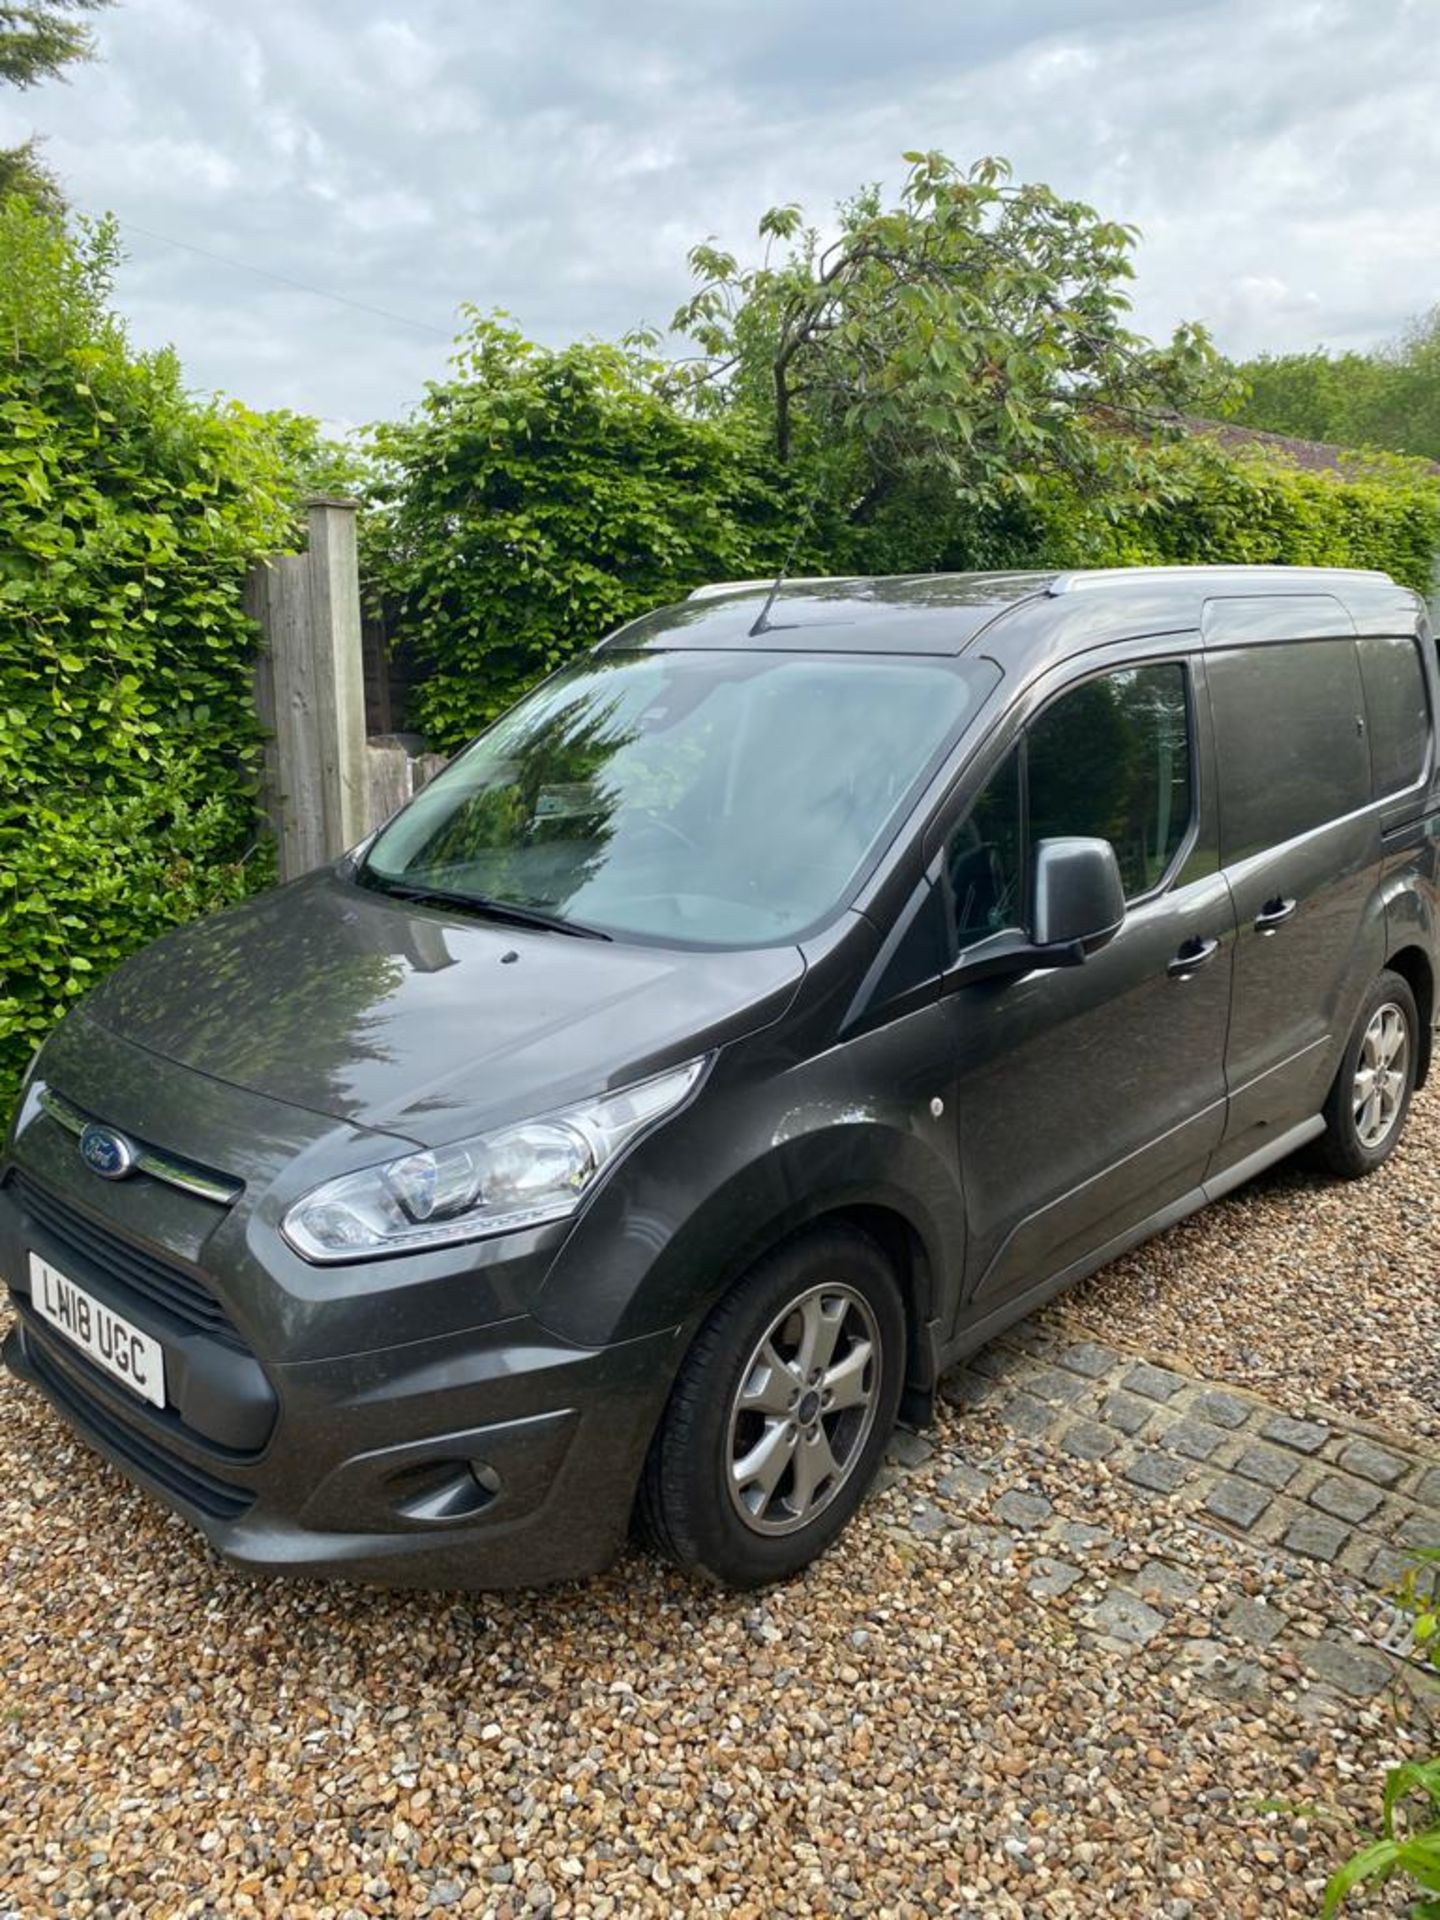 2018 (18) FORD TRANSIT CONNECT 200 LIMITED A, 65,000 MILES WARRANTED, 1499CC DIESEL ENGINE *PLUS VAT